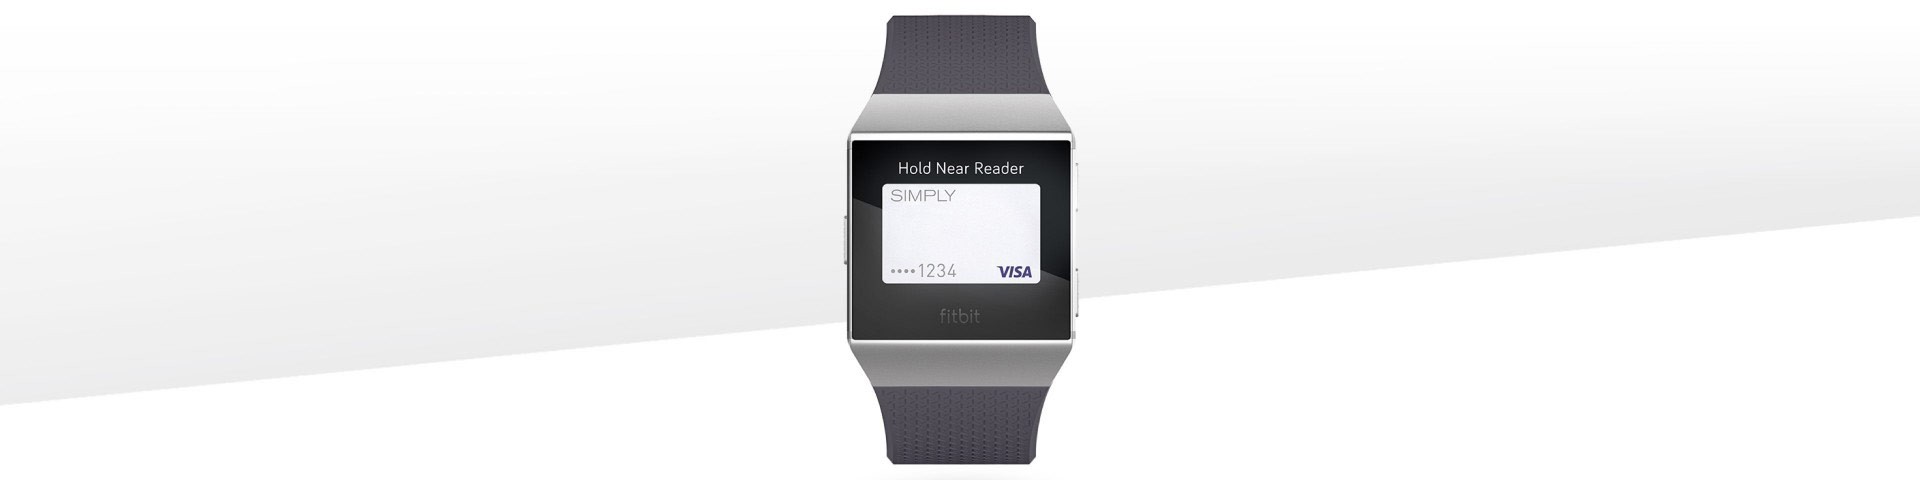 Fitbit Pay Watch